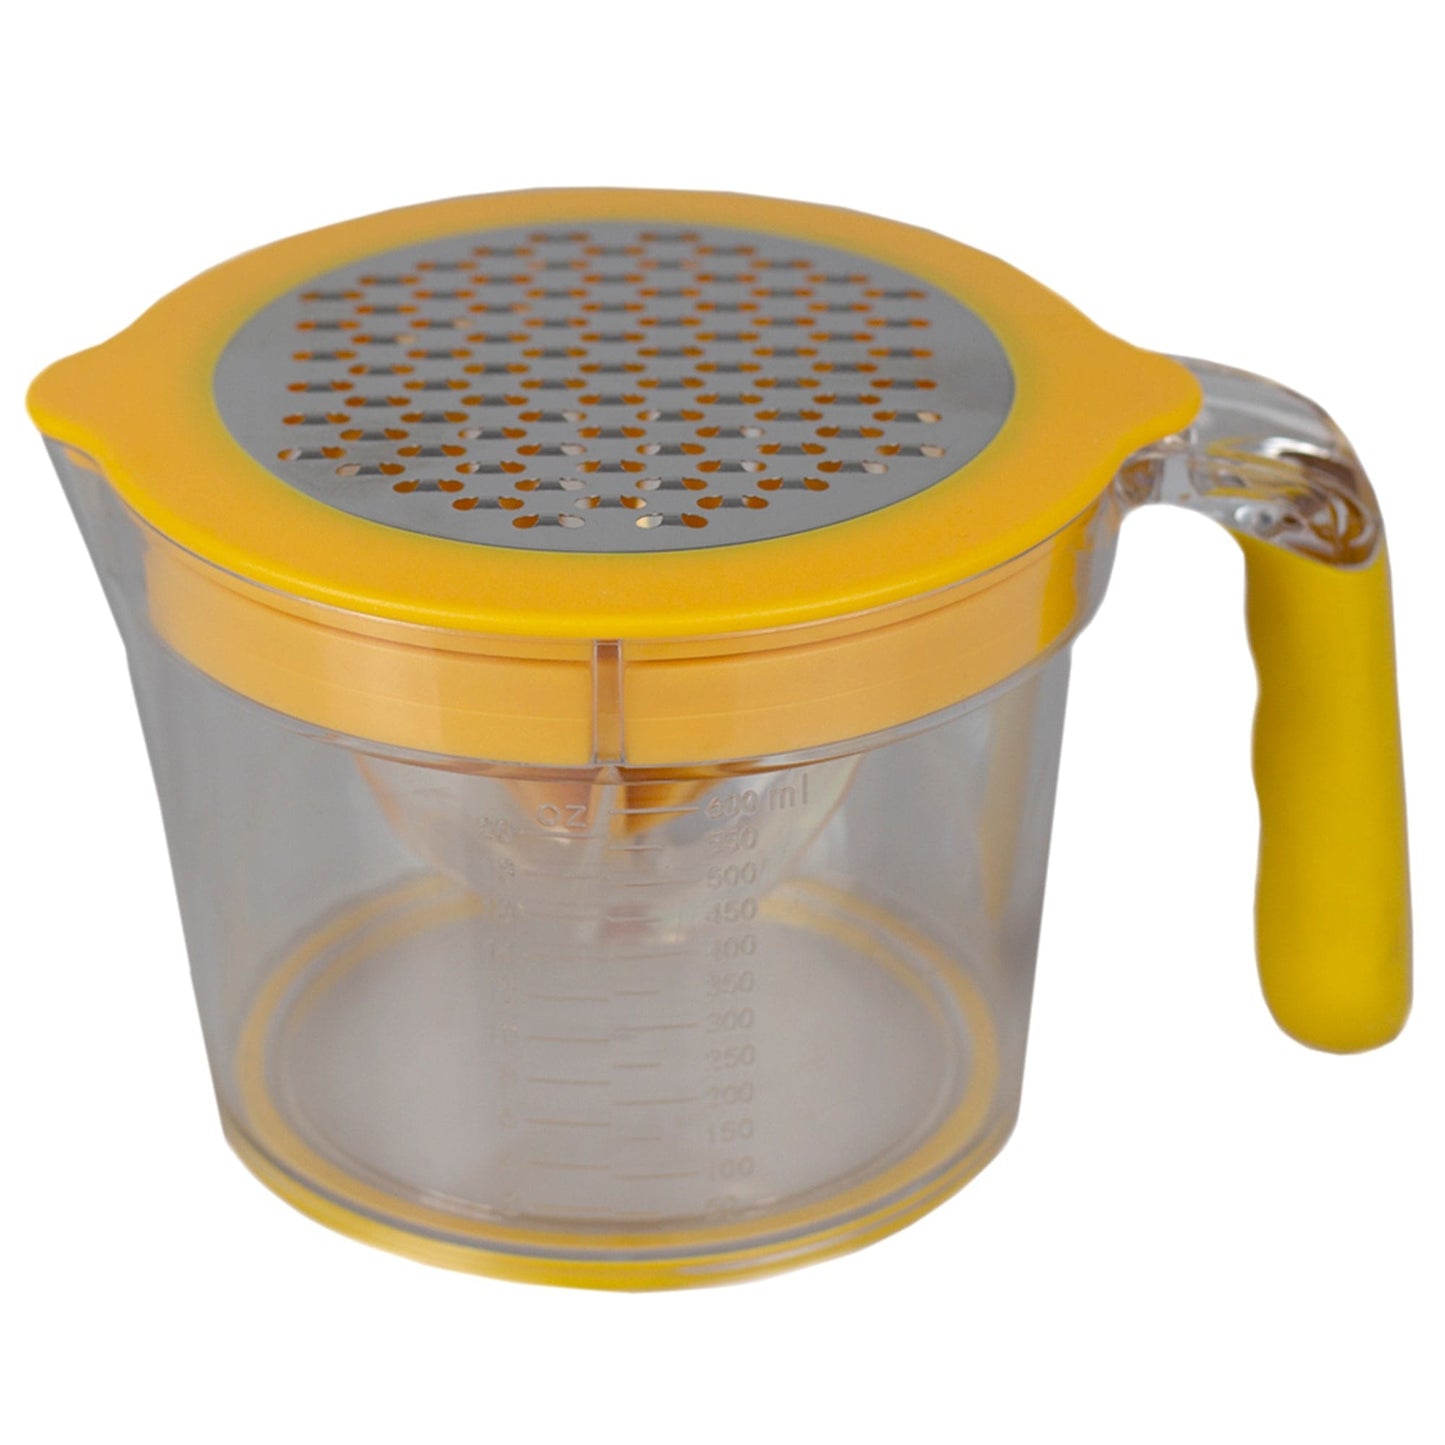 Manual Plastic Small Juicer, For Home And Kitchen